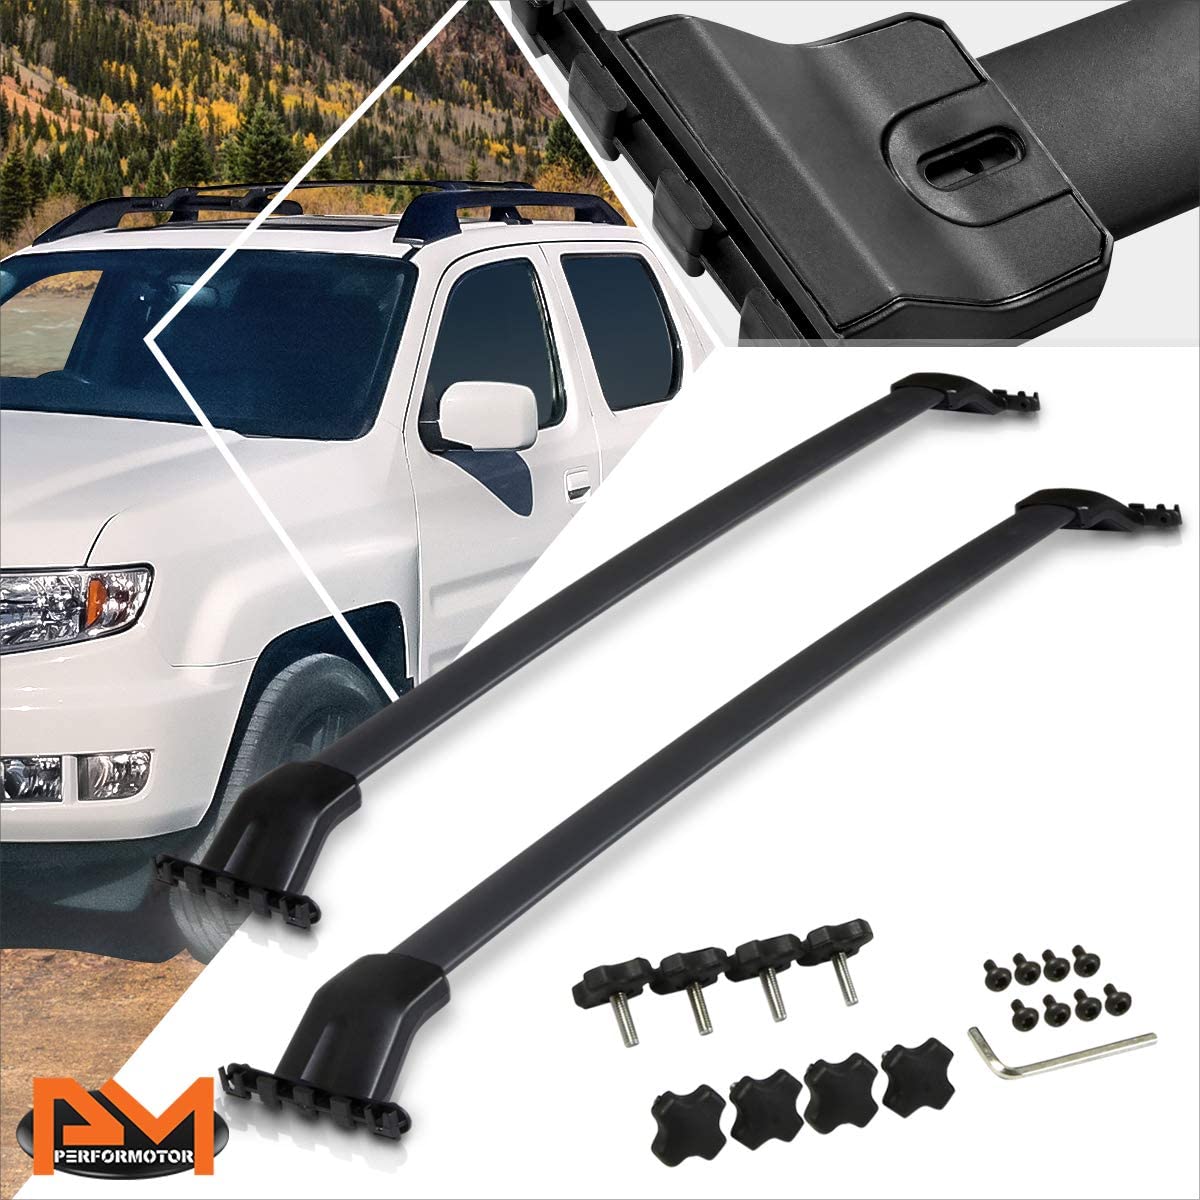 Compatible with Honda Pilot 09-15 Aluminum OE Style Roof Rack Top Rail Crossbar Luggage Bag Carrier